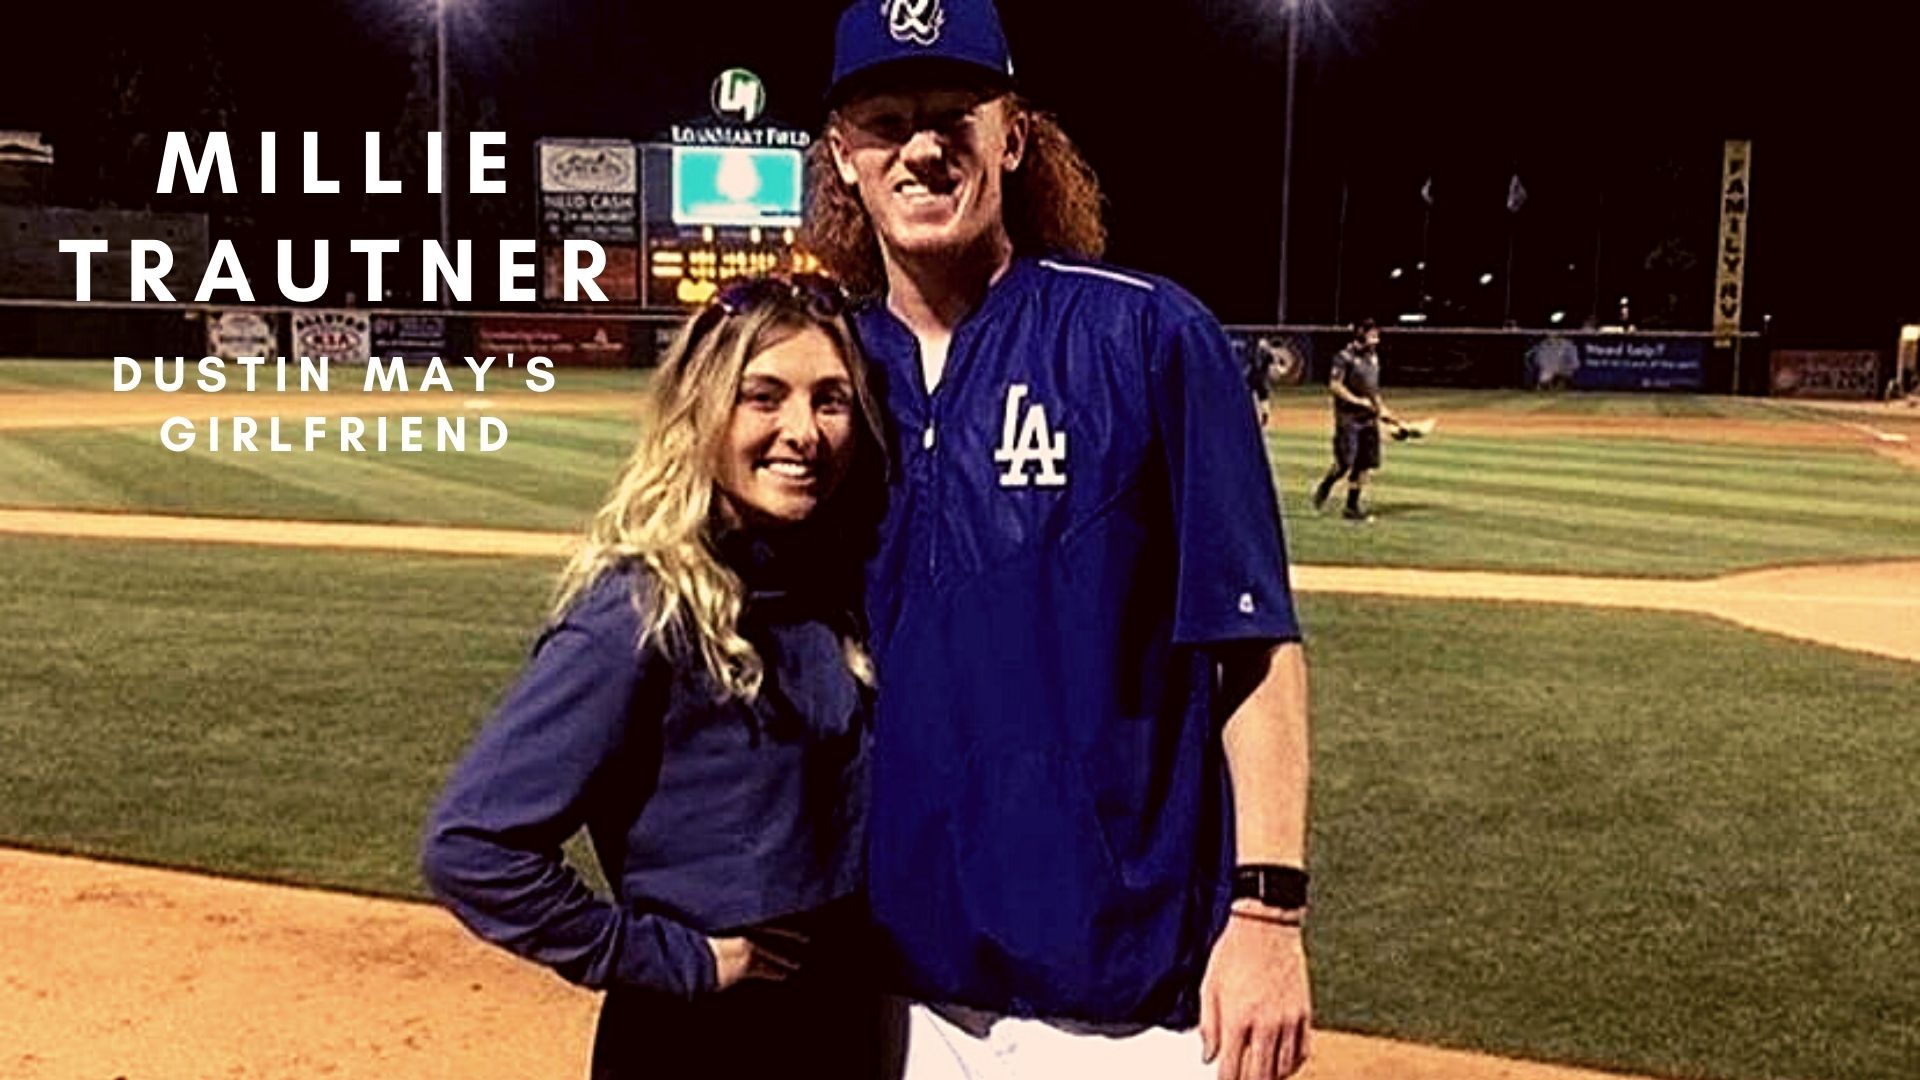 Who is the girlfriend of Dustin May? Learn all about Millie Trautner